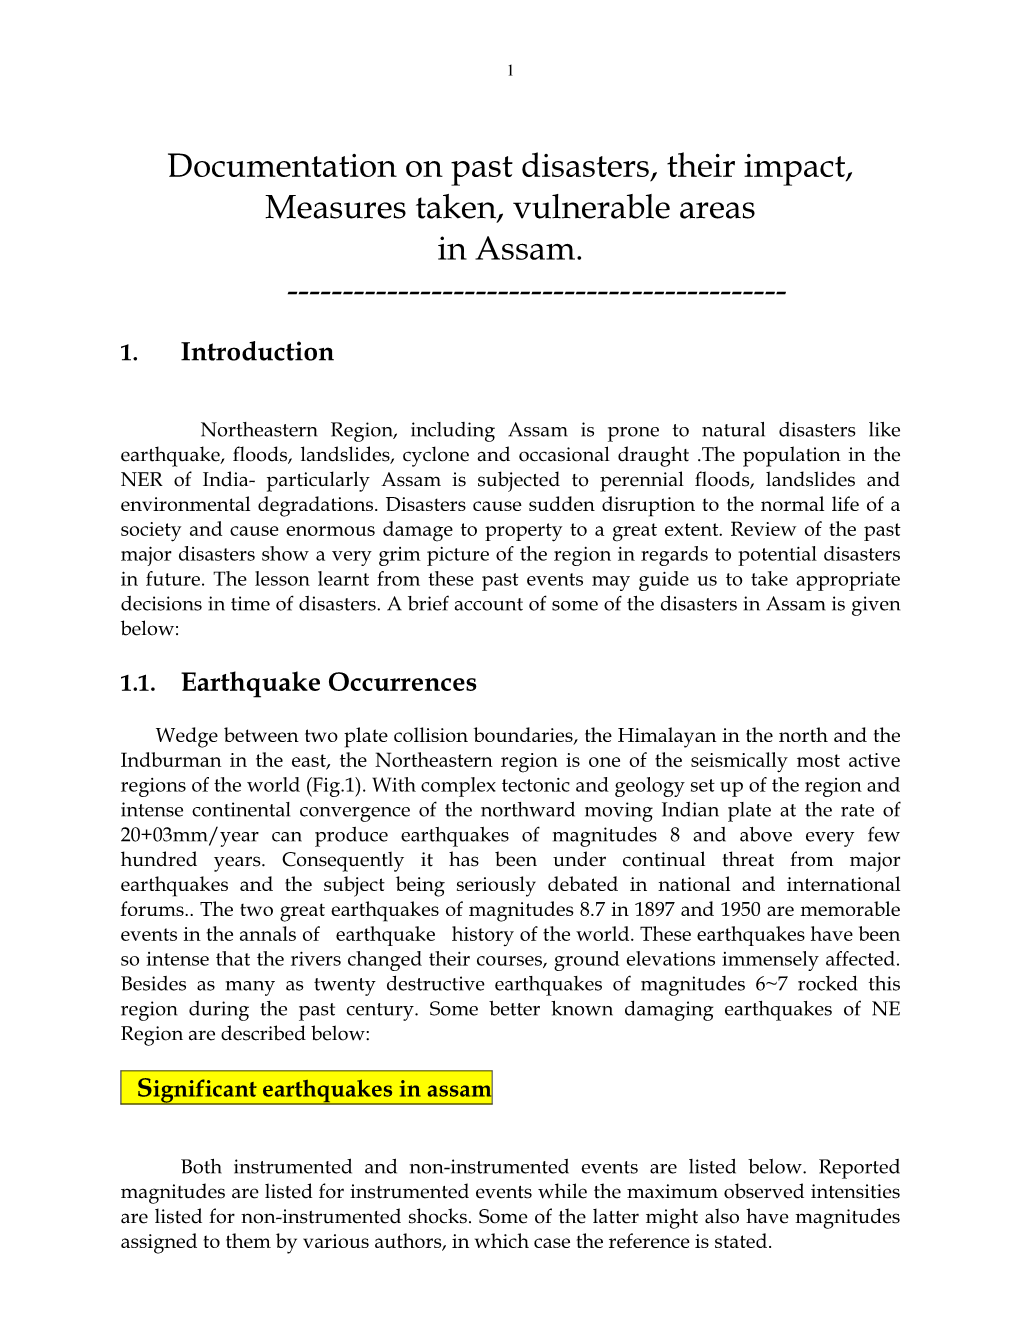 Documentation on Past Disasters.Pdf